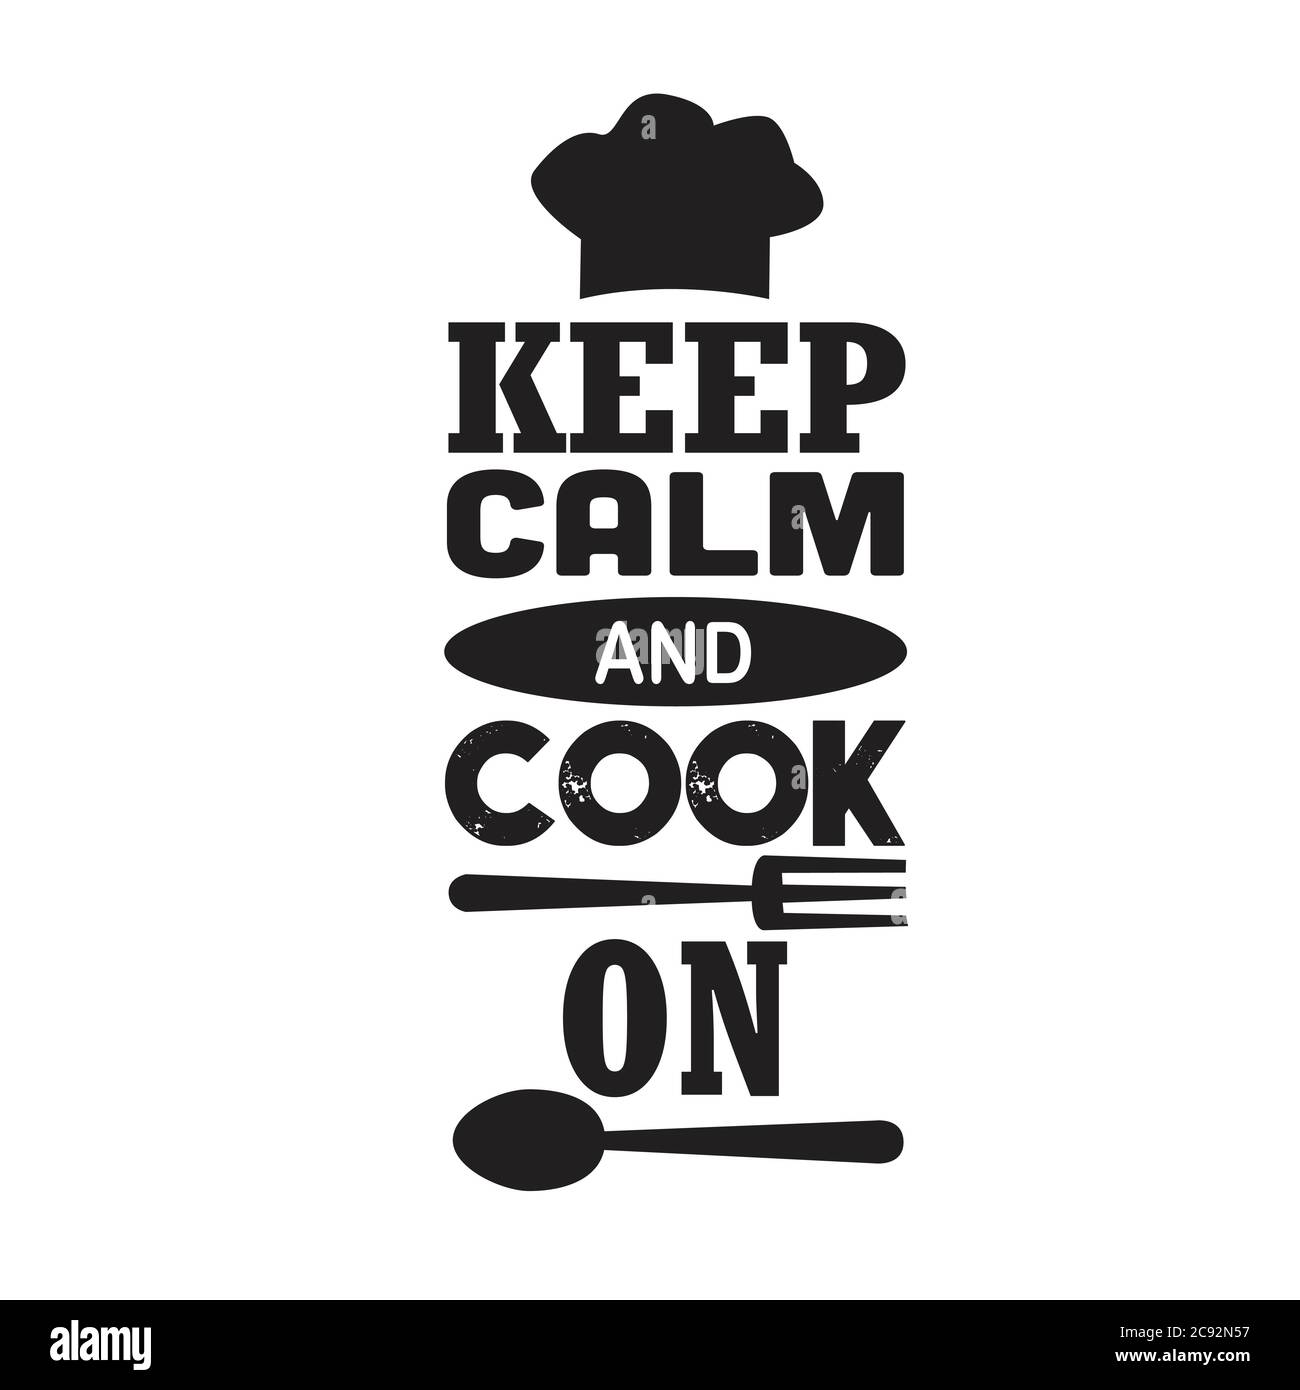 Cooking Quote and saying. Keep calm and cook on Stock Vector Image ...